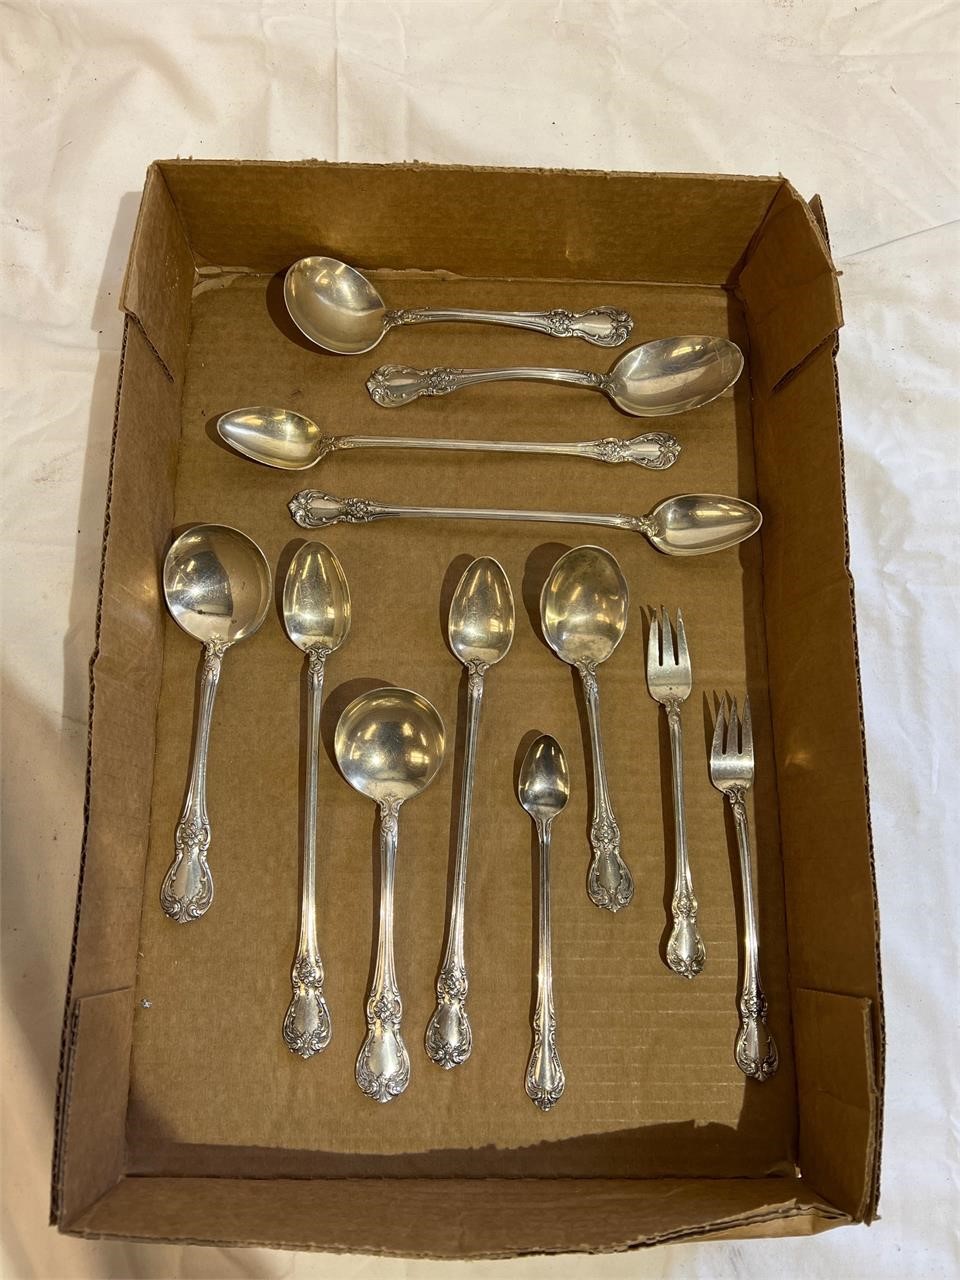 Towle Sterling Old Master service pieces